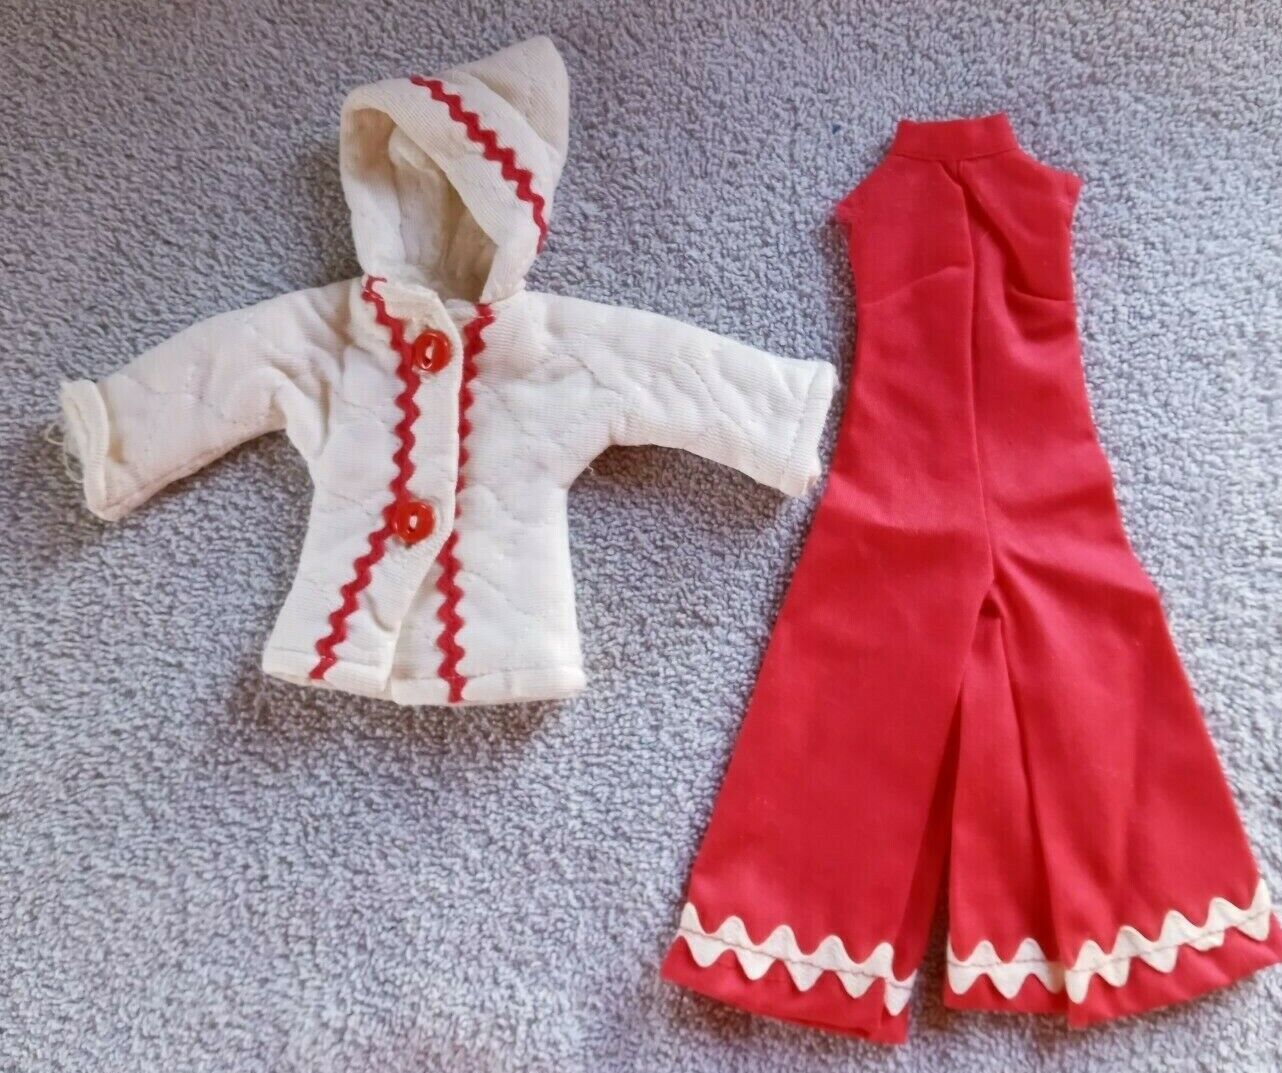 Vtg Barbie Clone Homemade 1960s Jumpsuit Coat Red White Ric Rac Mod Outfit Lot 2 Unbranded